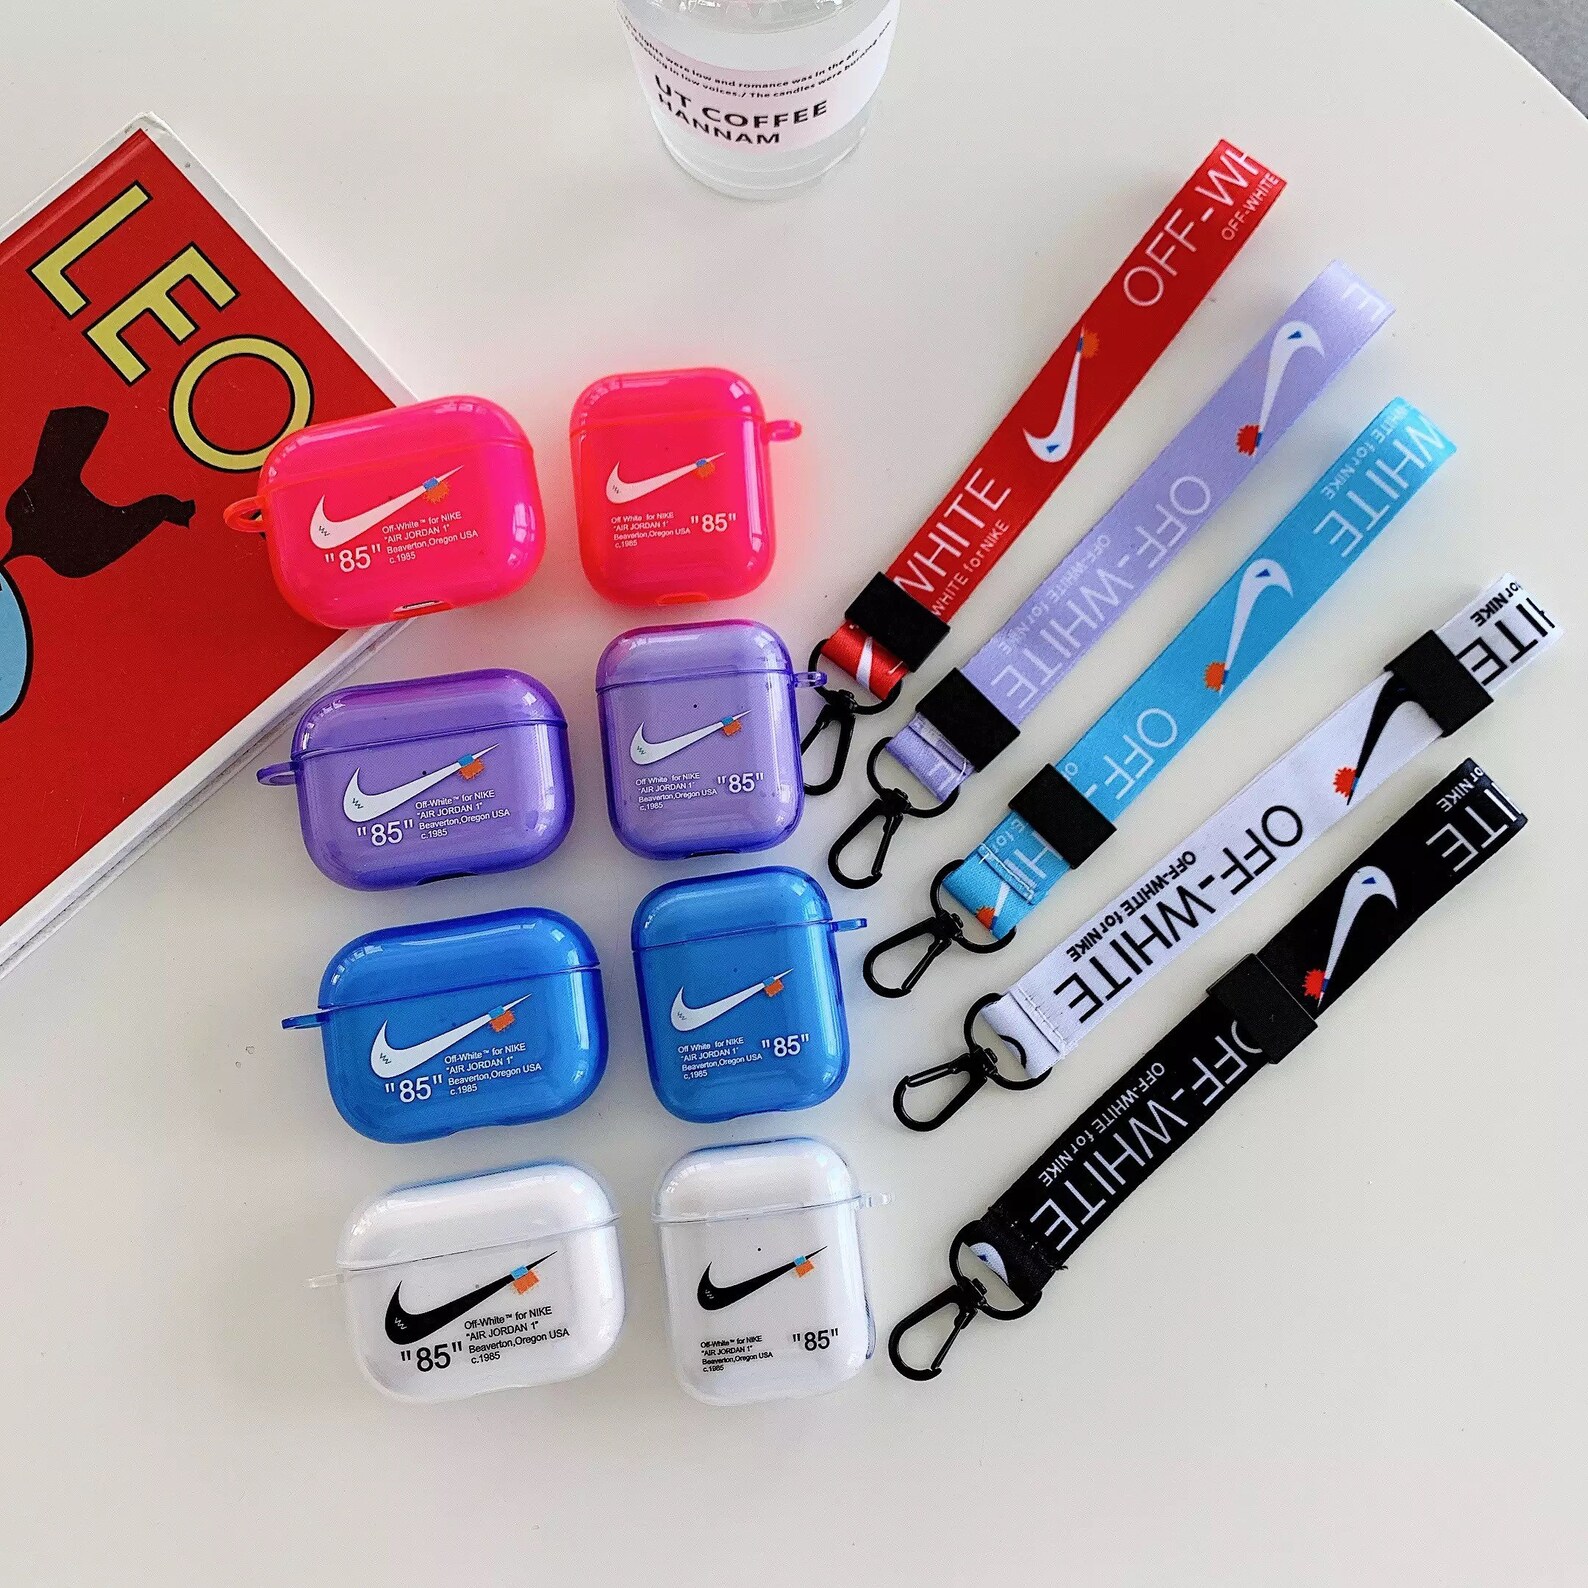 Nike AirPod Cases AirPod cases headphones iPhone | Etsy